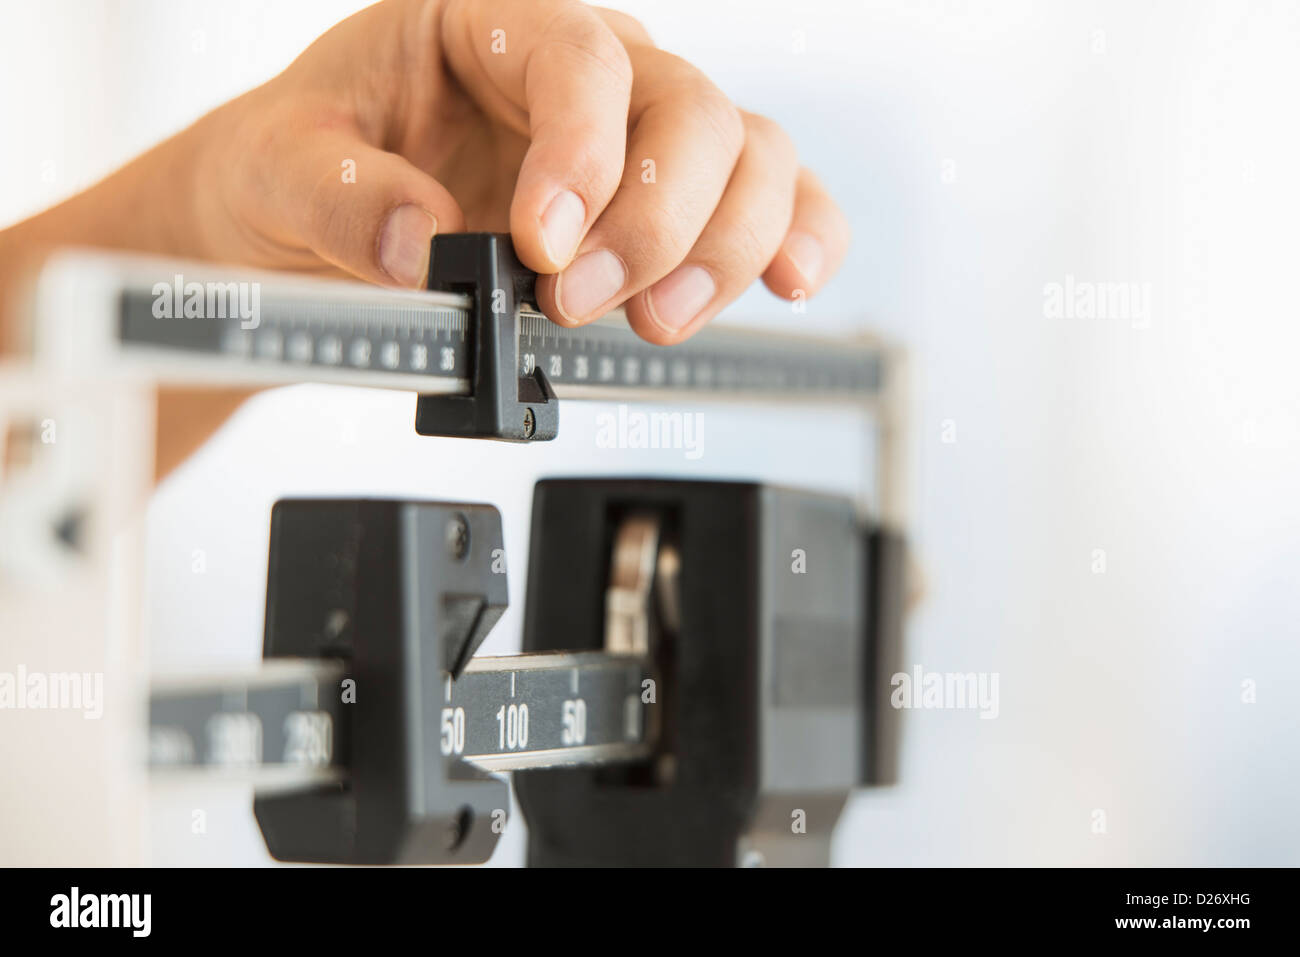 Hand adjusting weight scales Stock Photo